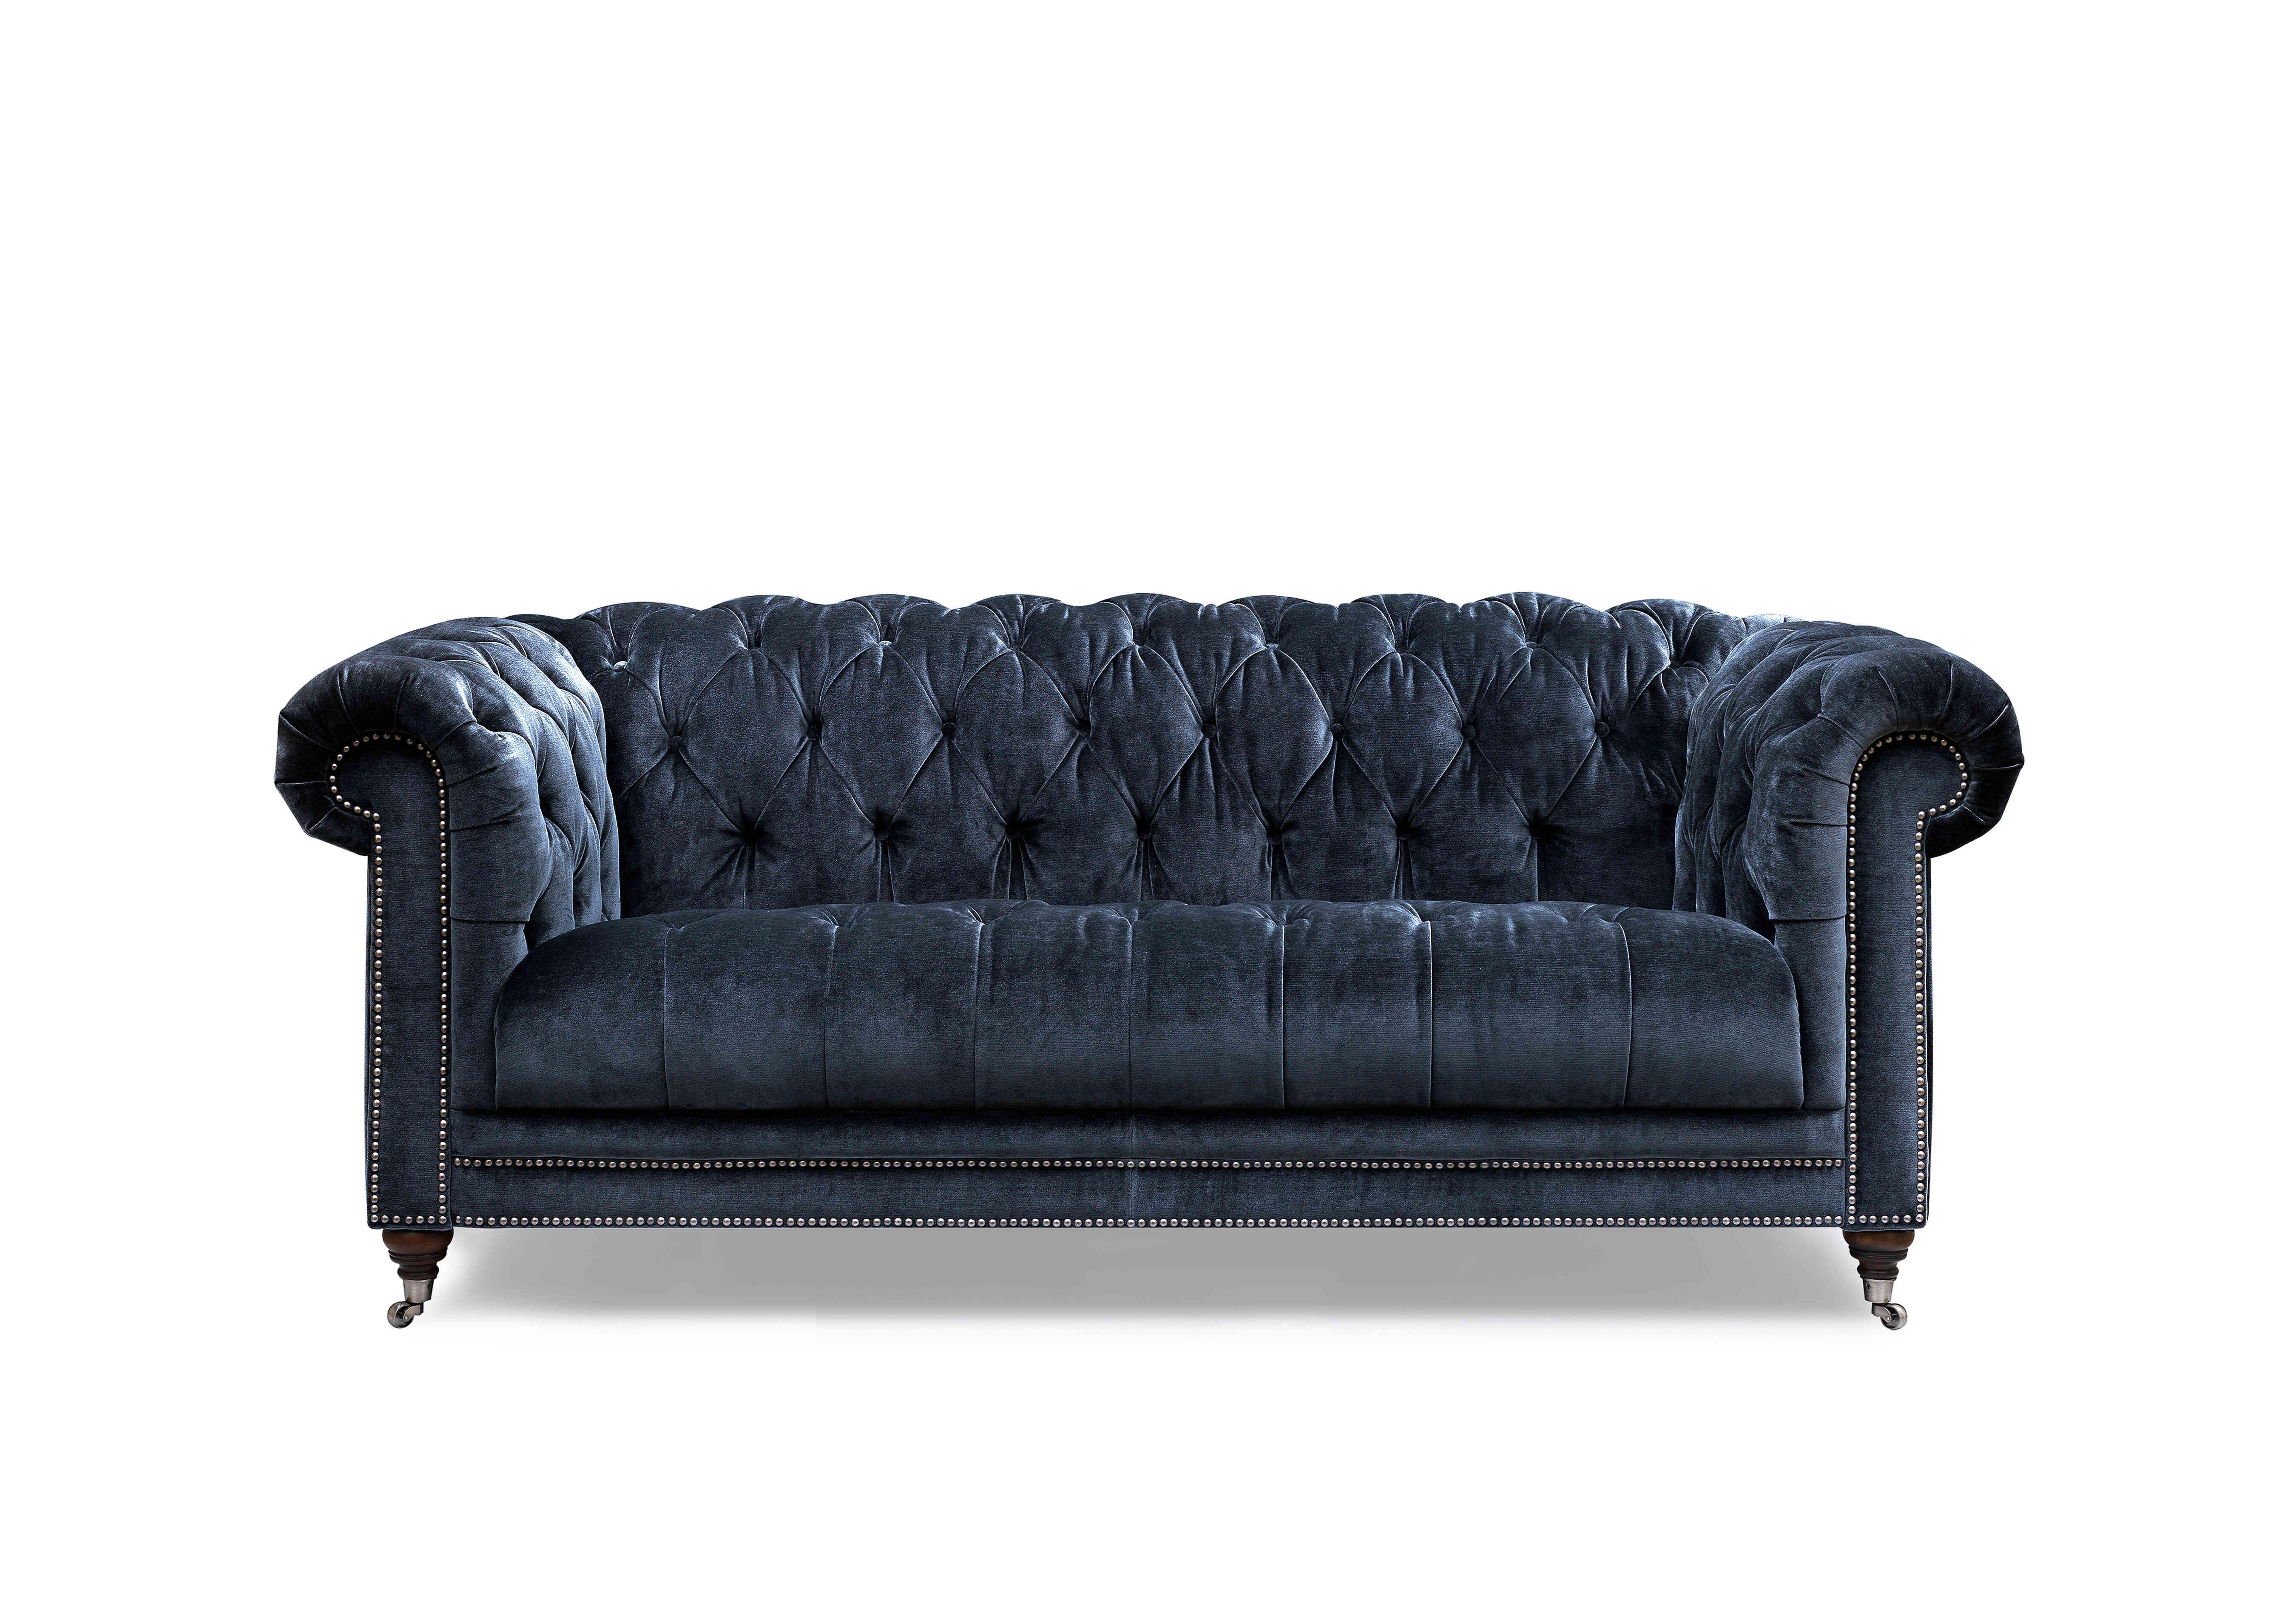 Walter 3 Seater Fabric Chesterfield Sofa in X3y2-W024 Midnight on Furniture Village